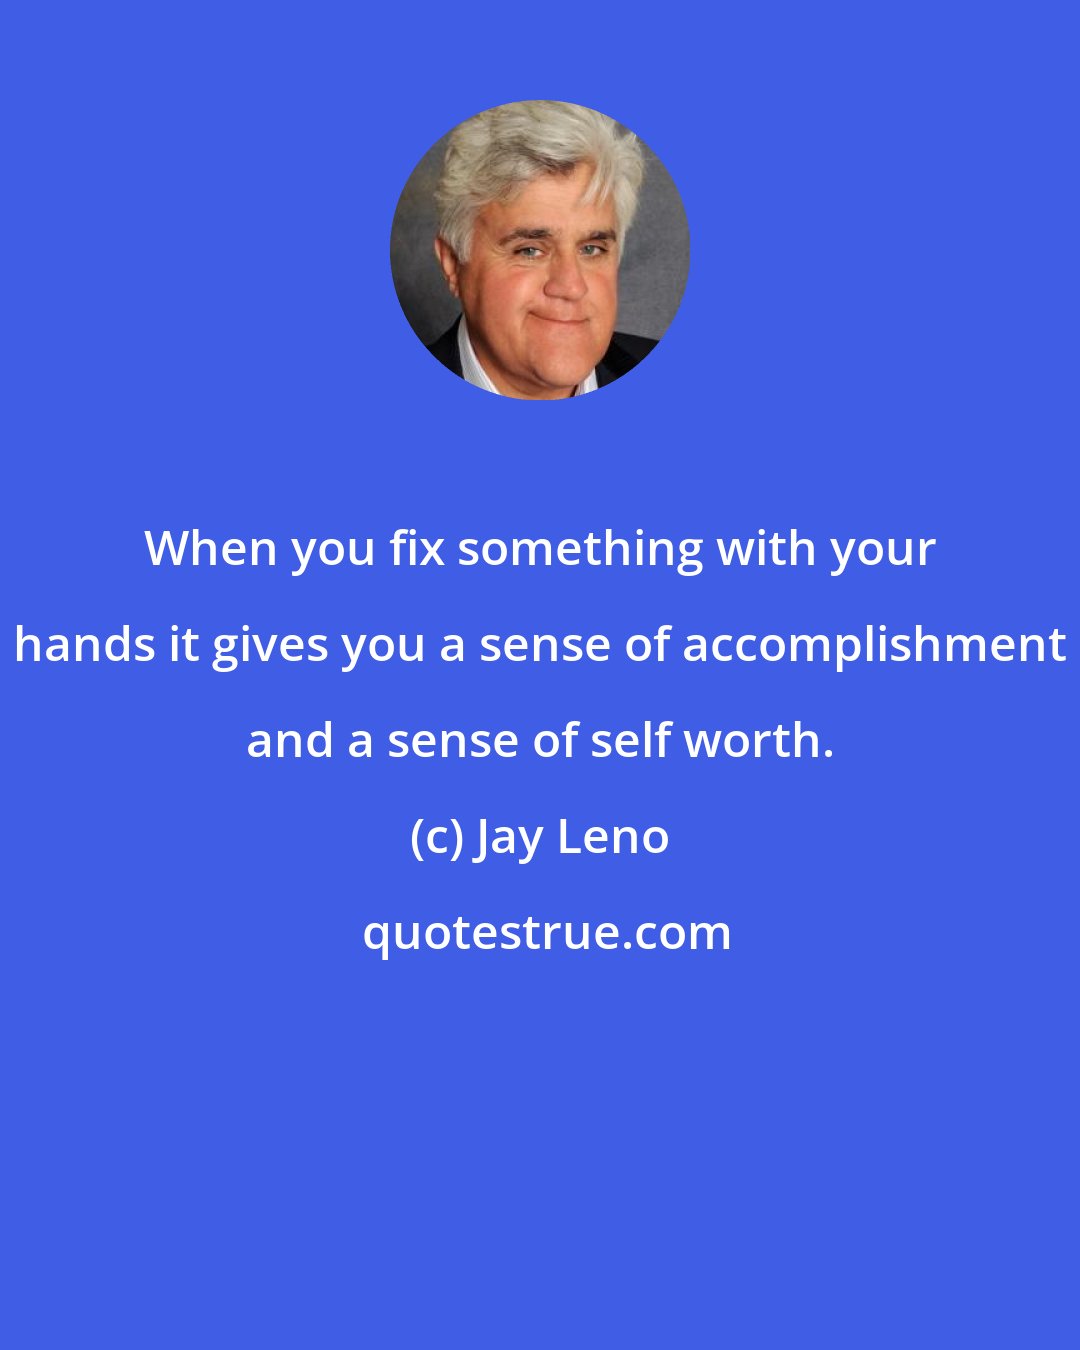 Jay Leno: When you fix something with your hands it gives you a sense of accomplishment and a sense of self worth.